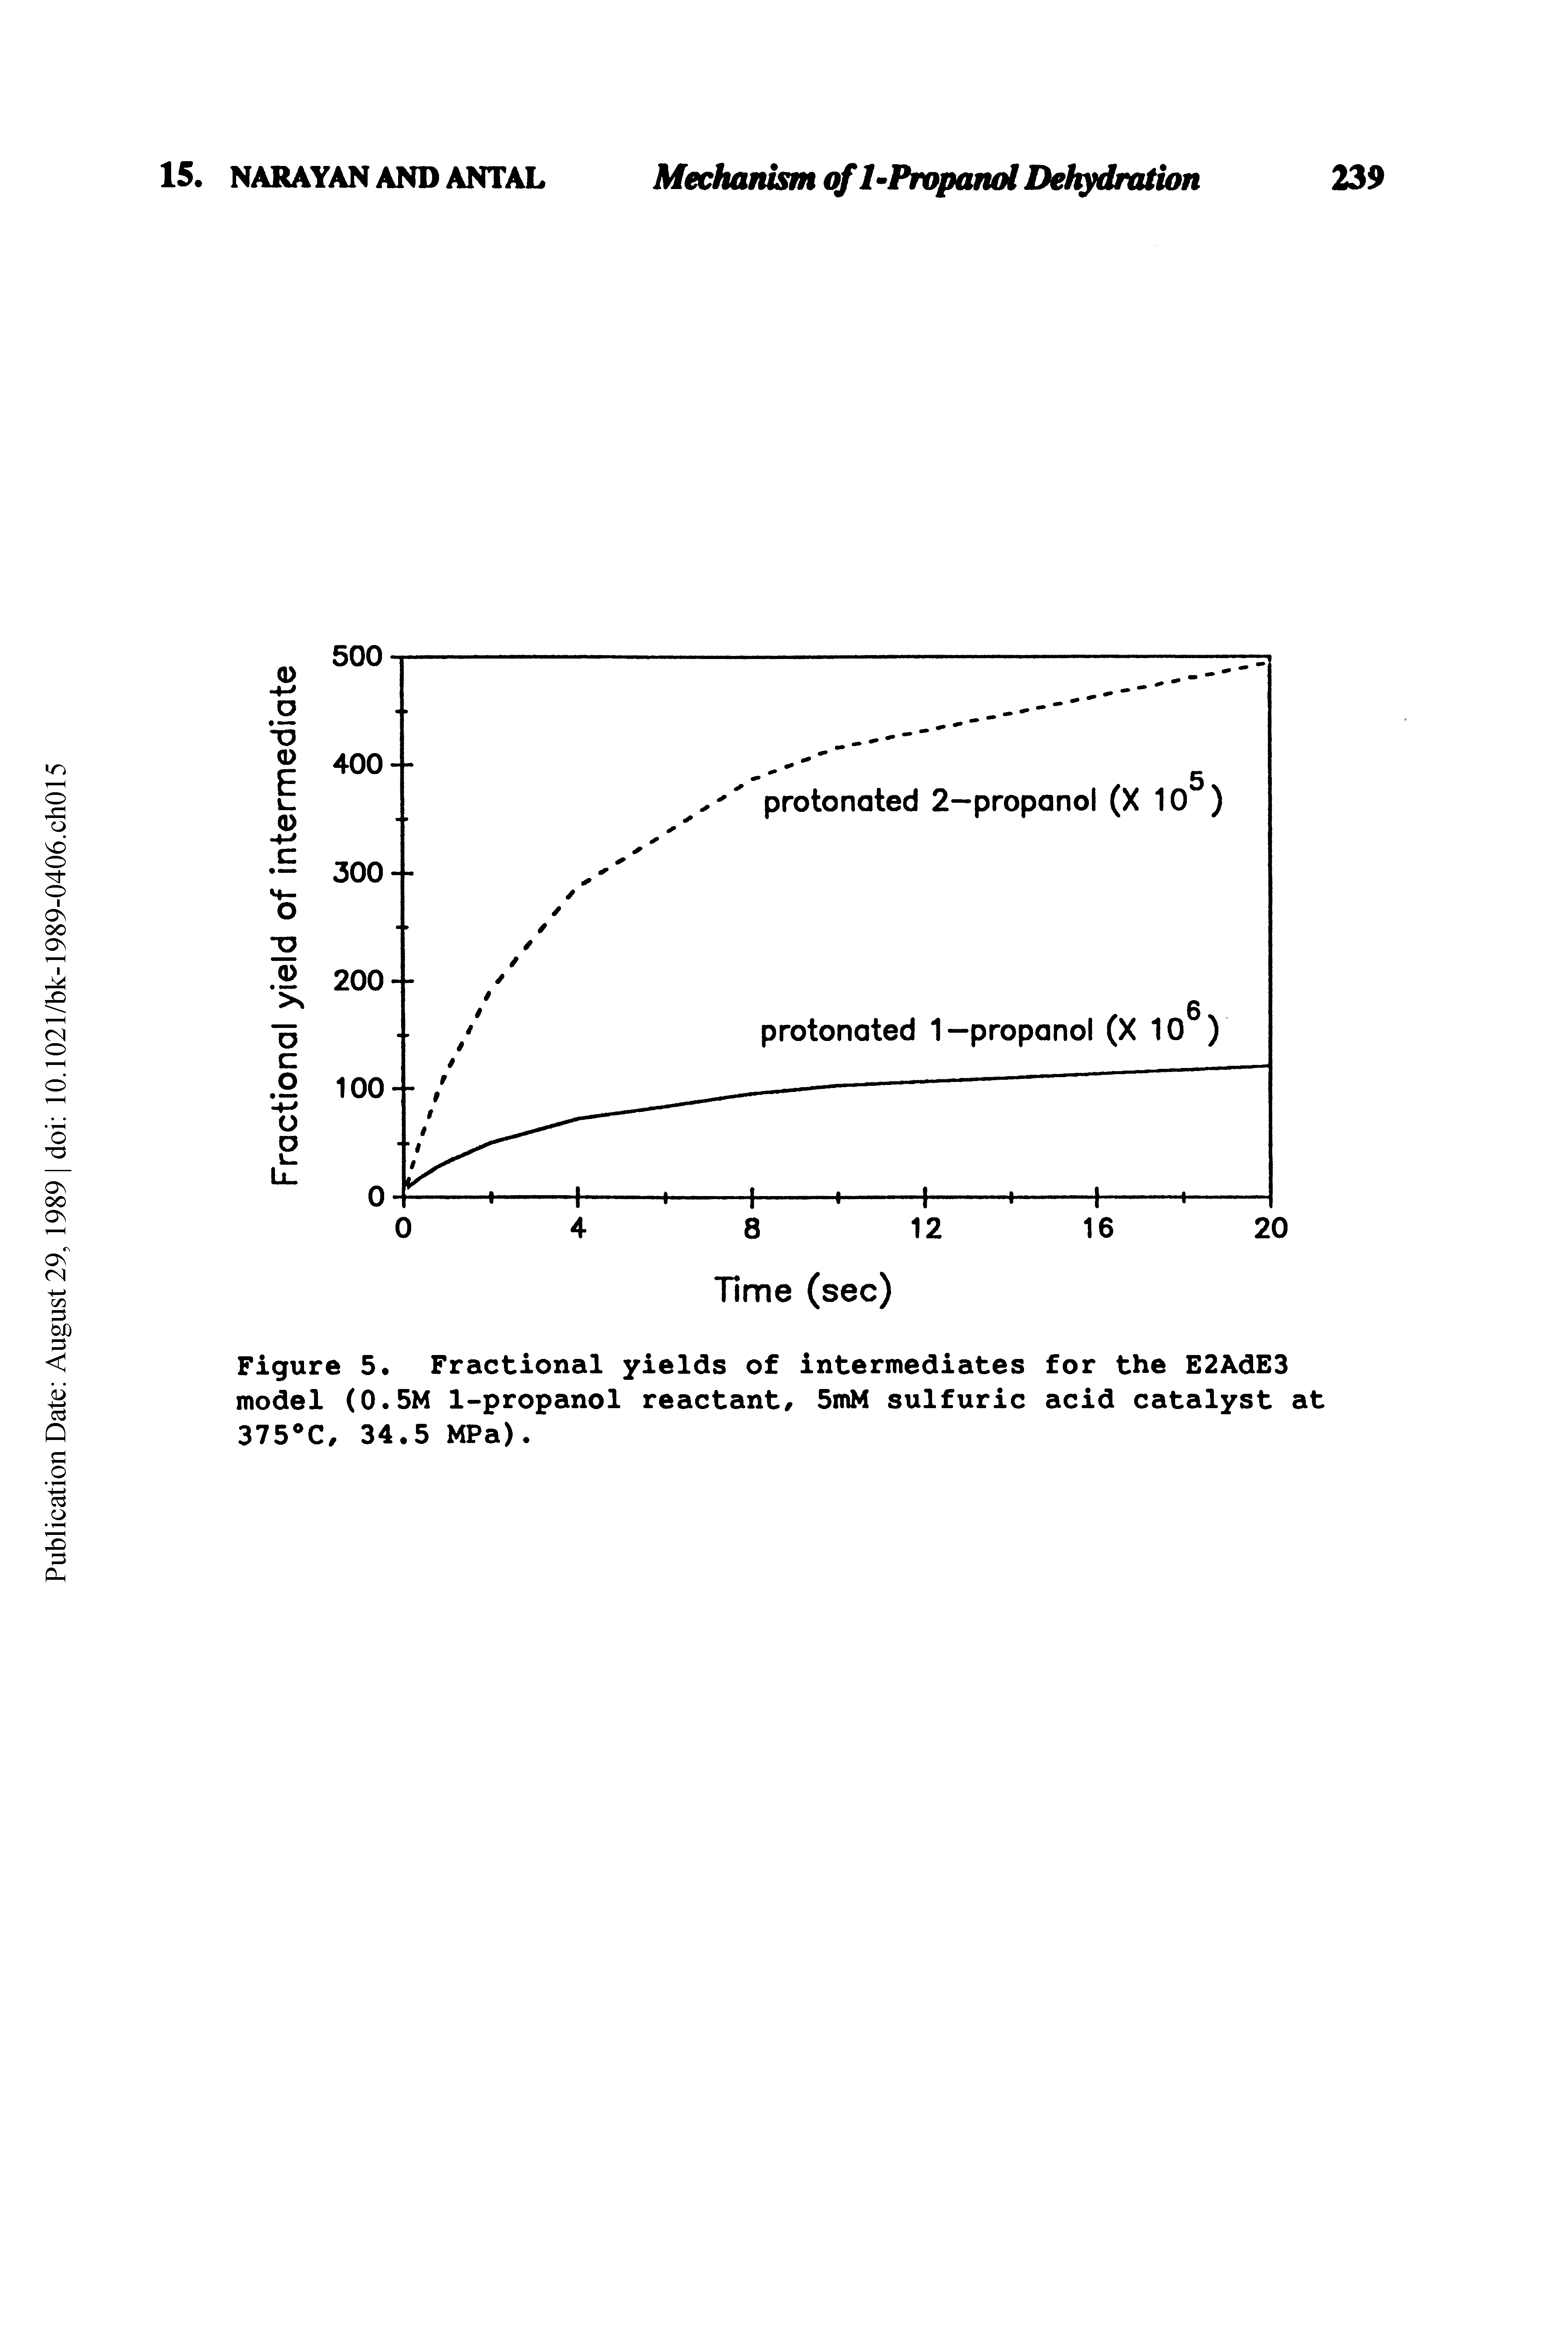 Figure 5. Fractional yields of intermediates for the E2AdE3 model (0.5M 1-propanol reactant/ 5mM sulfuric acid catalyst at 375 C/ 34.5 MPa).